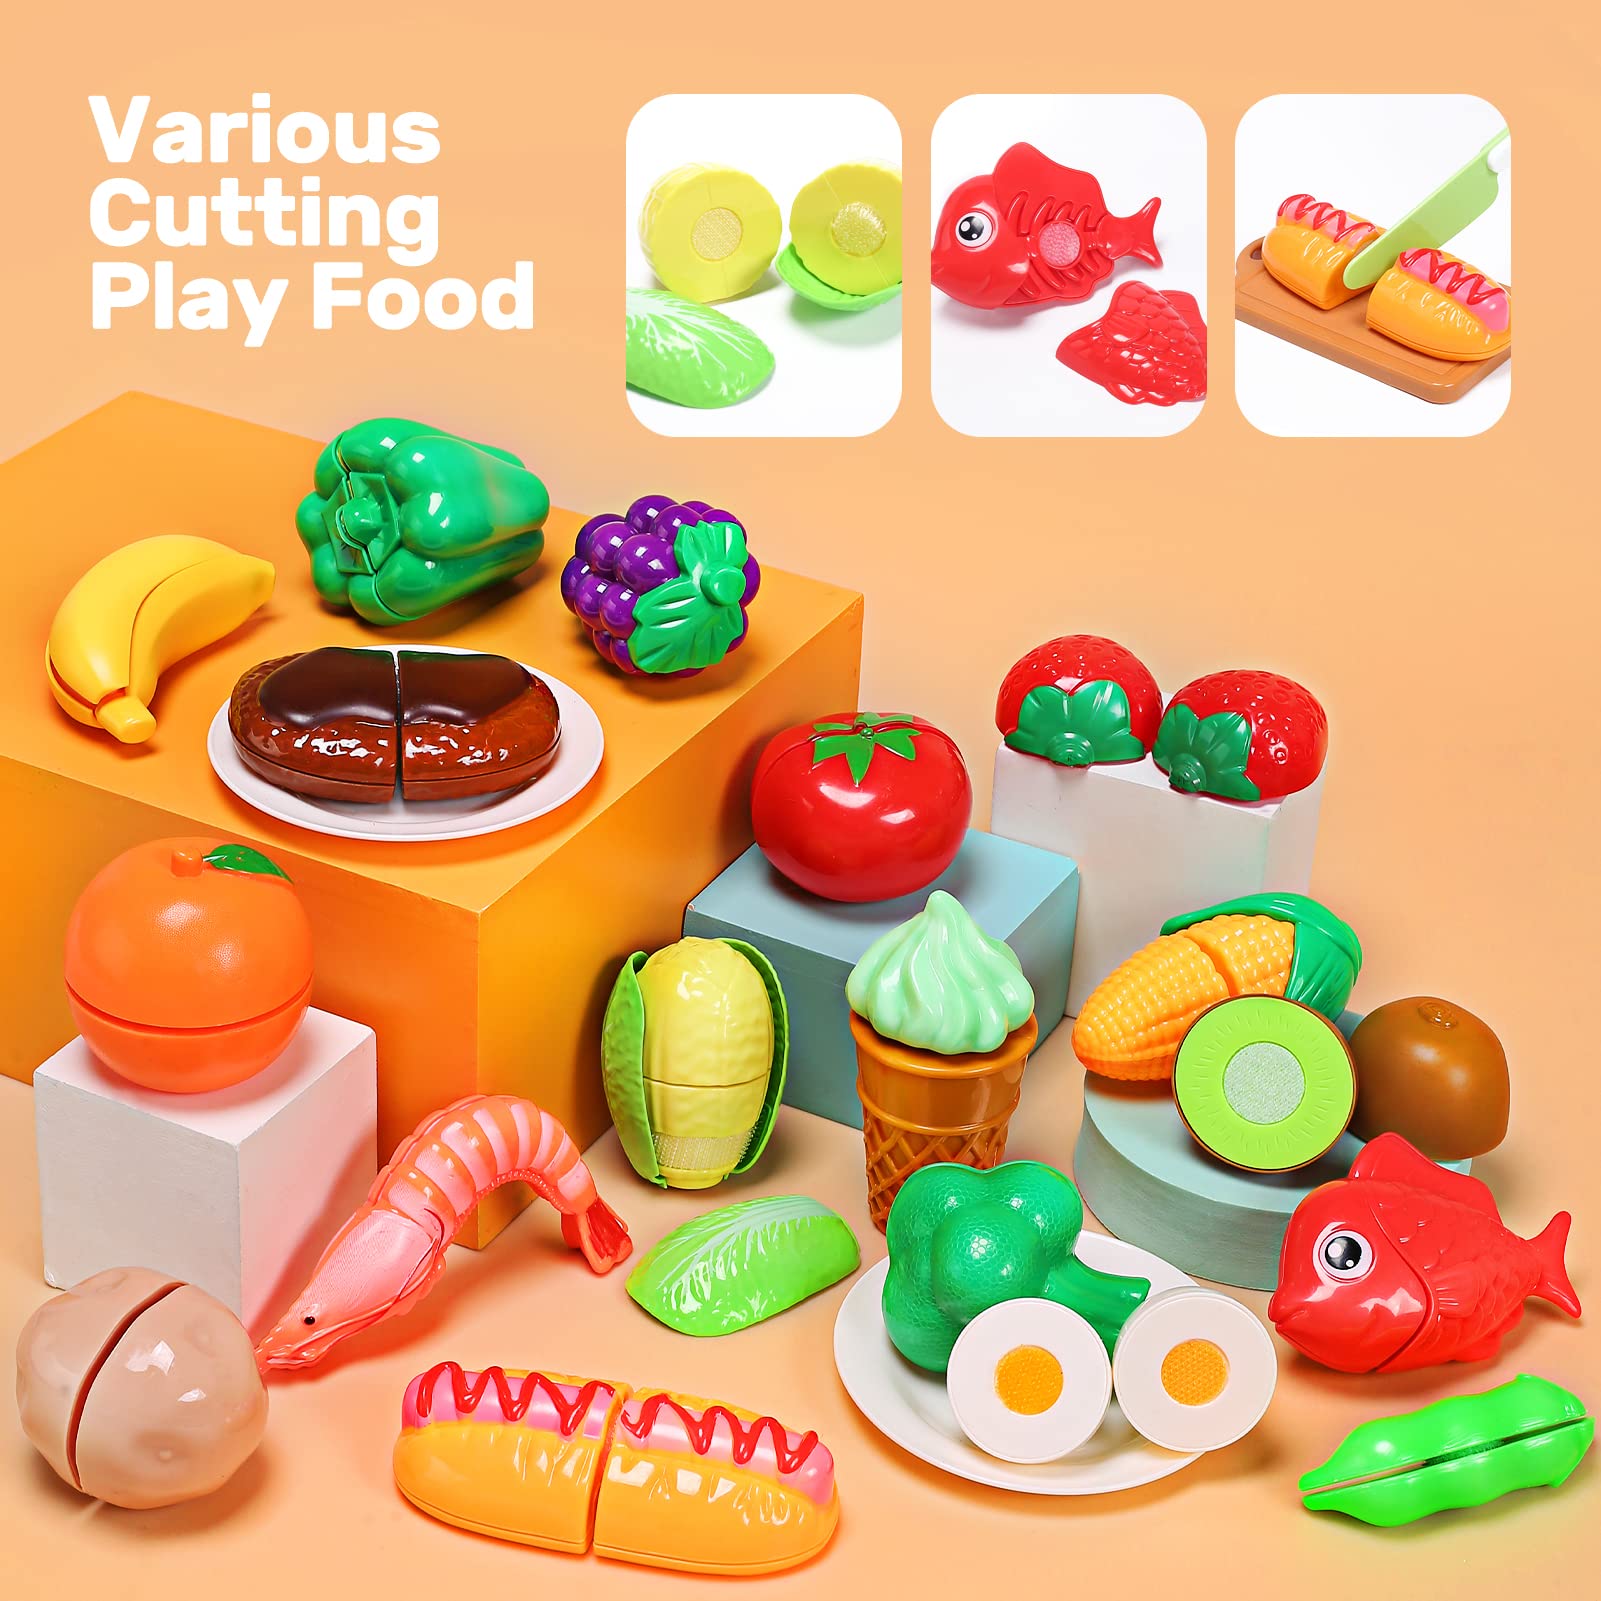  CUTE STONE Kids Kitchen Accessories Set, Play Food Sets for  Kids Kitchen, Kids Cooking Sets with Play Pots and Pans, Utensils Cookware  Toys, Kids Kitchen Playset, Play Kitchen Toy for Girls